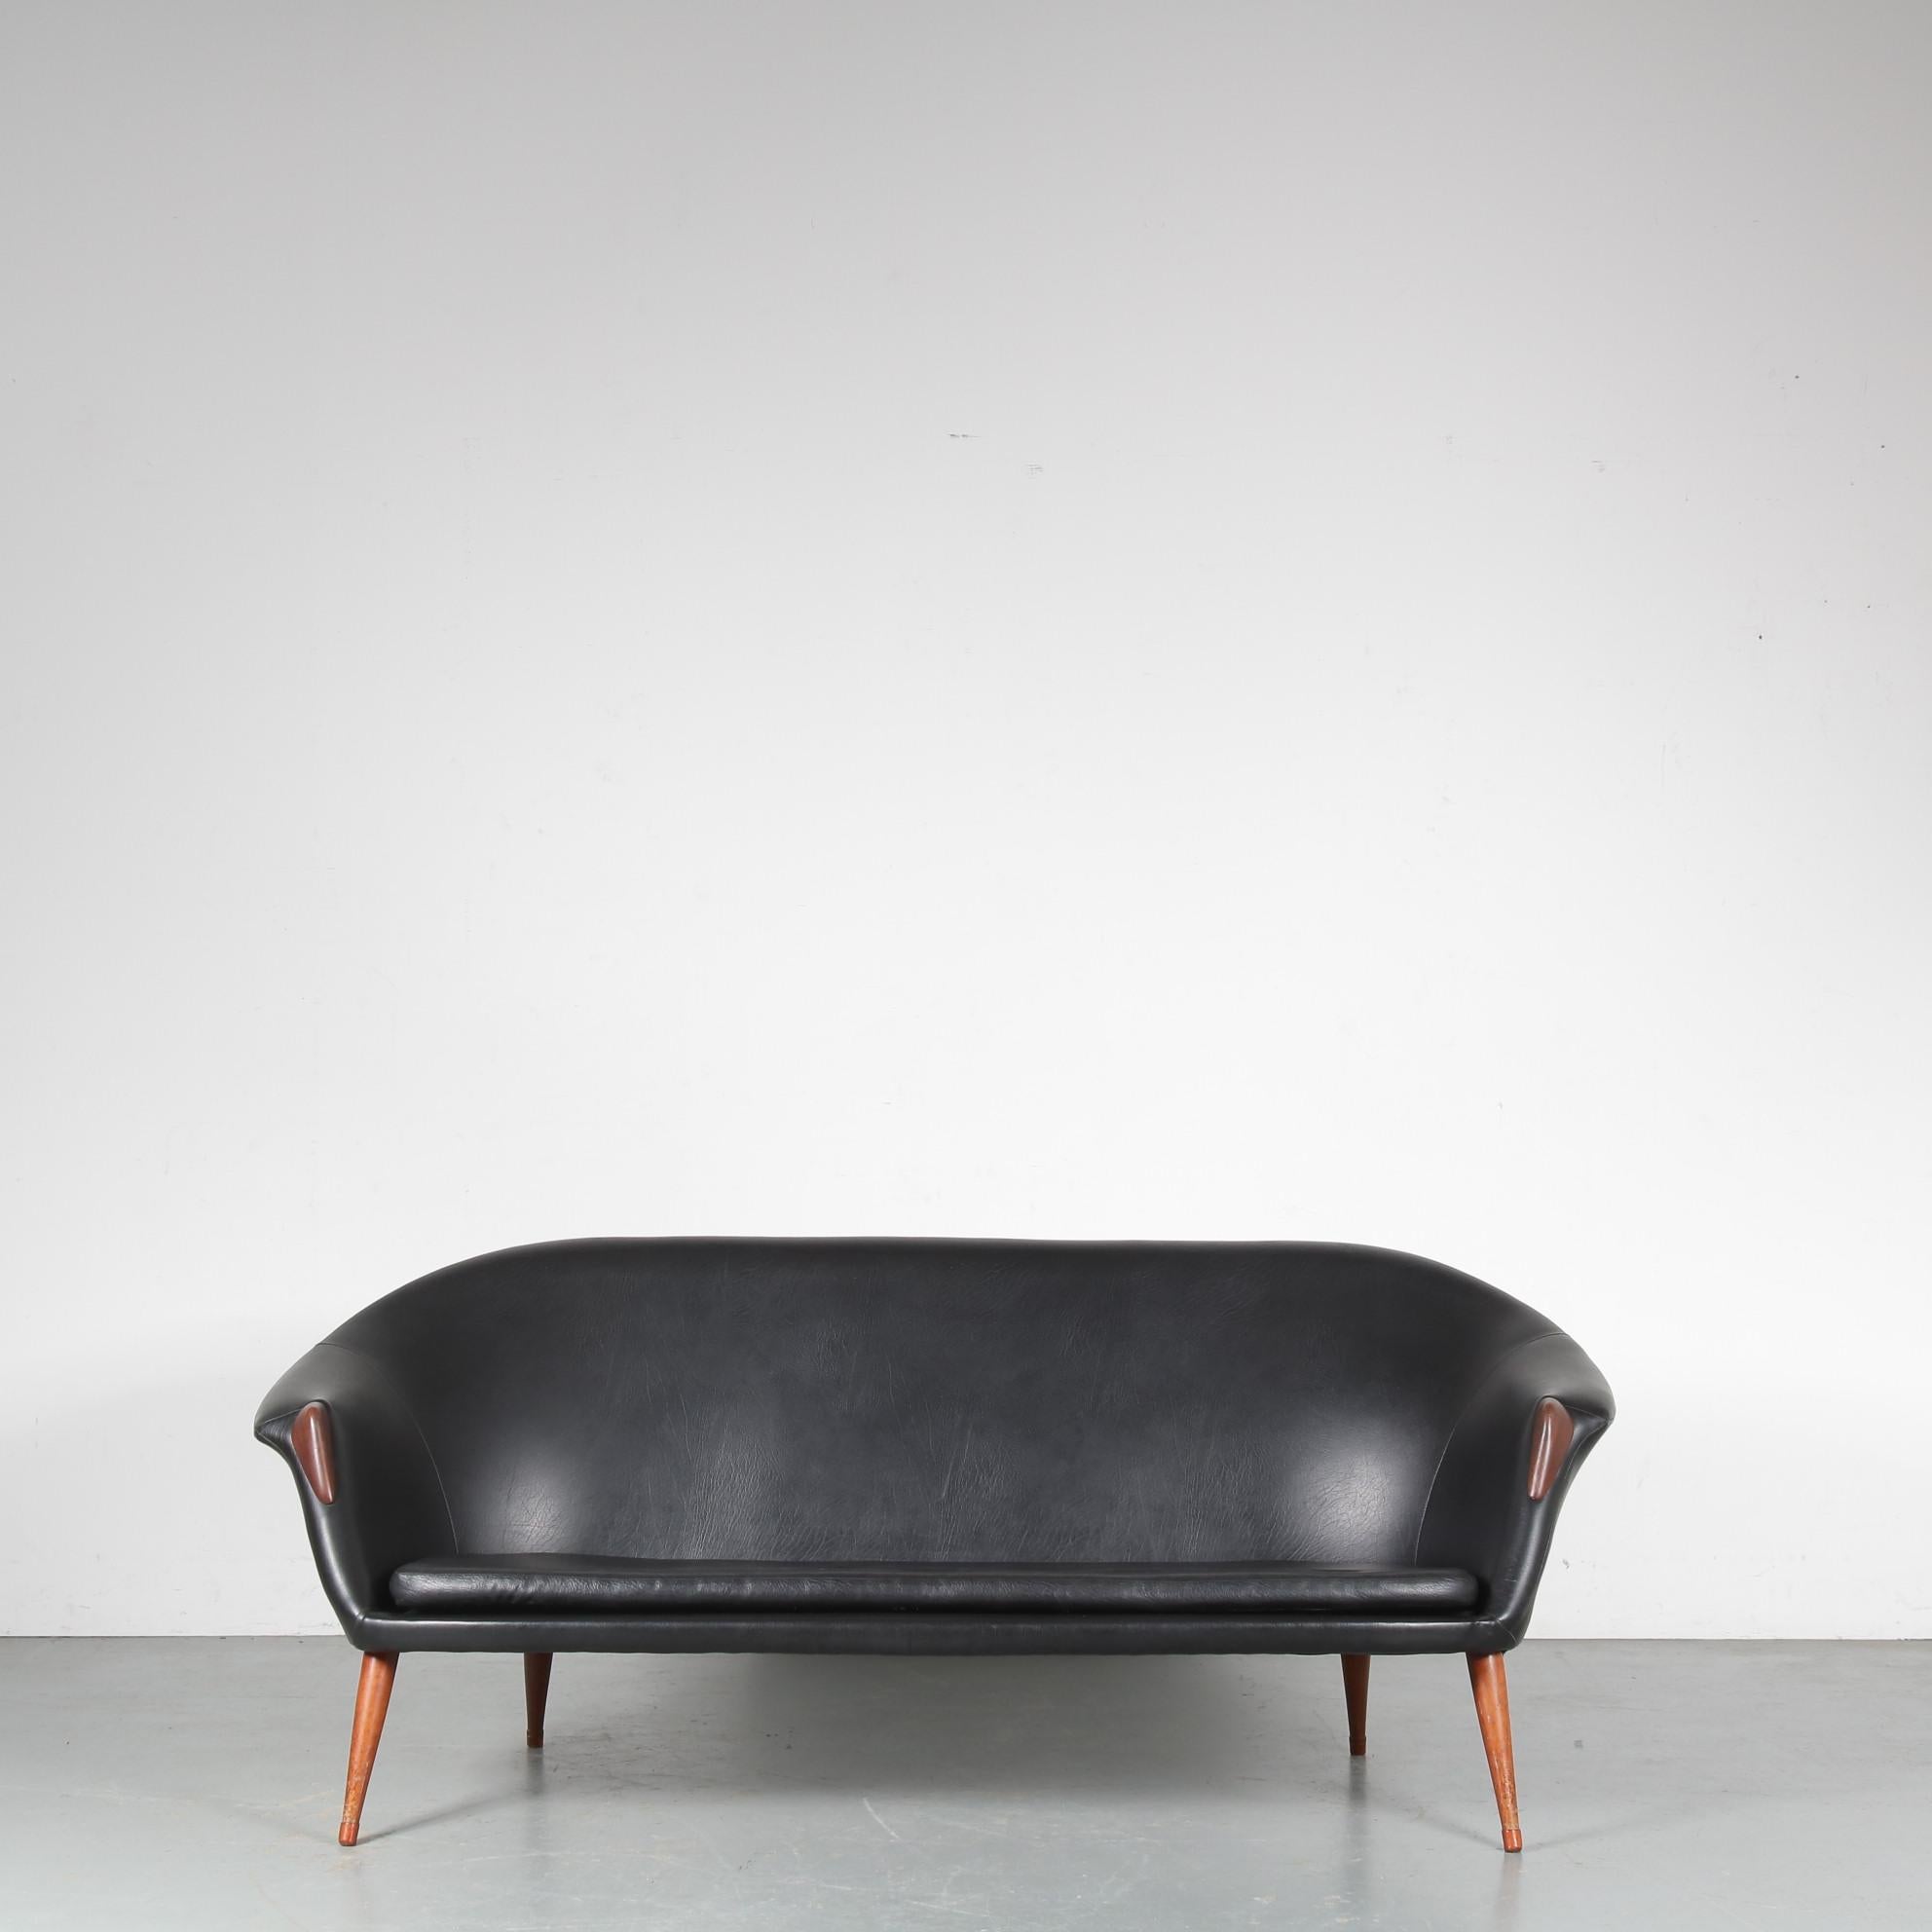 A beautiful 3-seater sofa in Scandinavian style, attributed to Nanna Ditzel, manufactured in Denmark around 1950.

This elegant sofa is beautifully made of high quality black faux leather (skai), nicely complimented by the warm brown wooden legs and